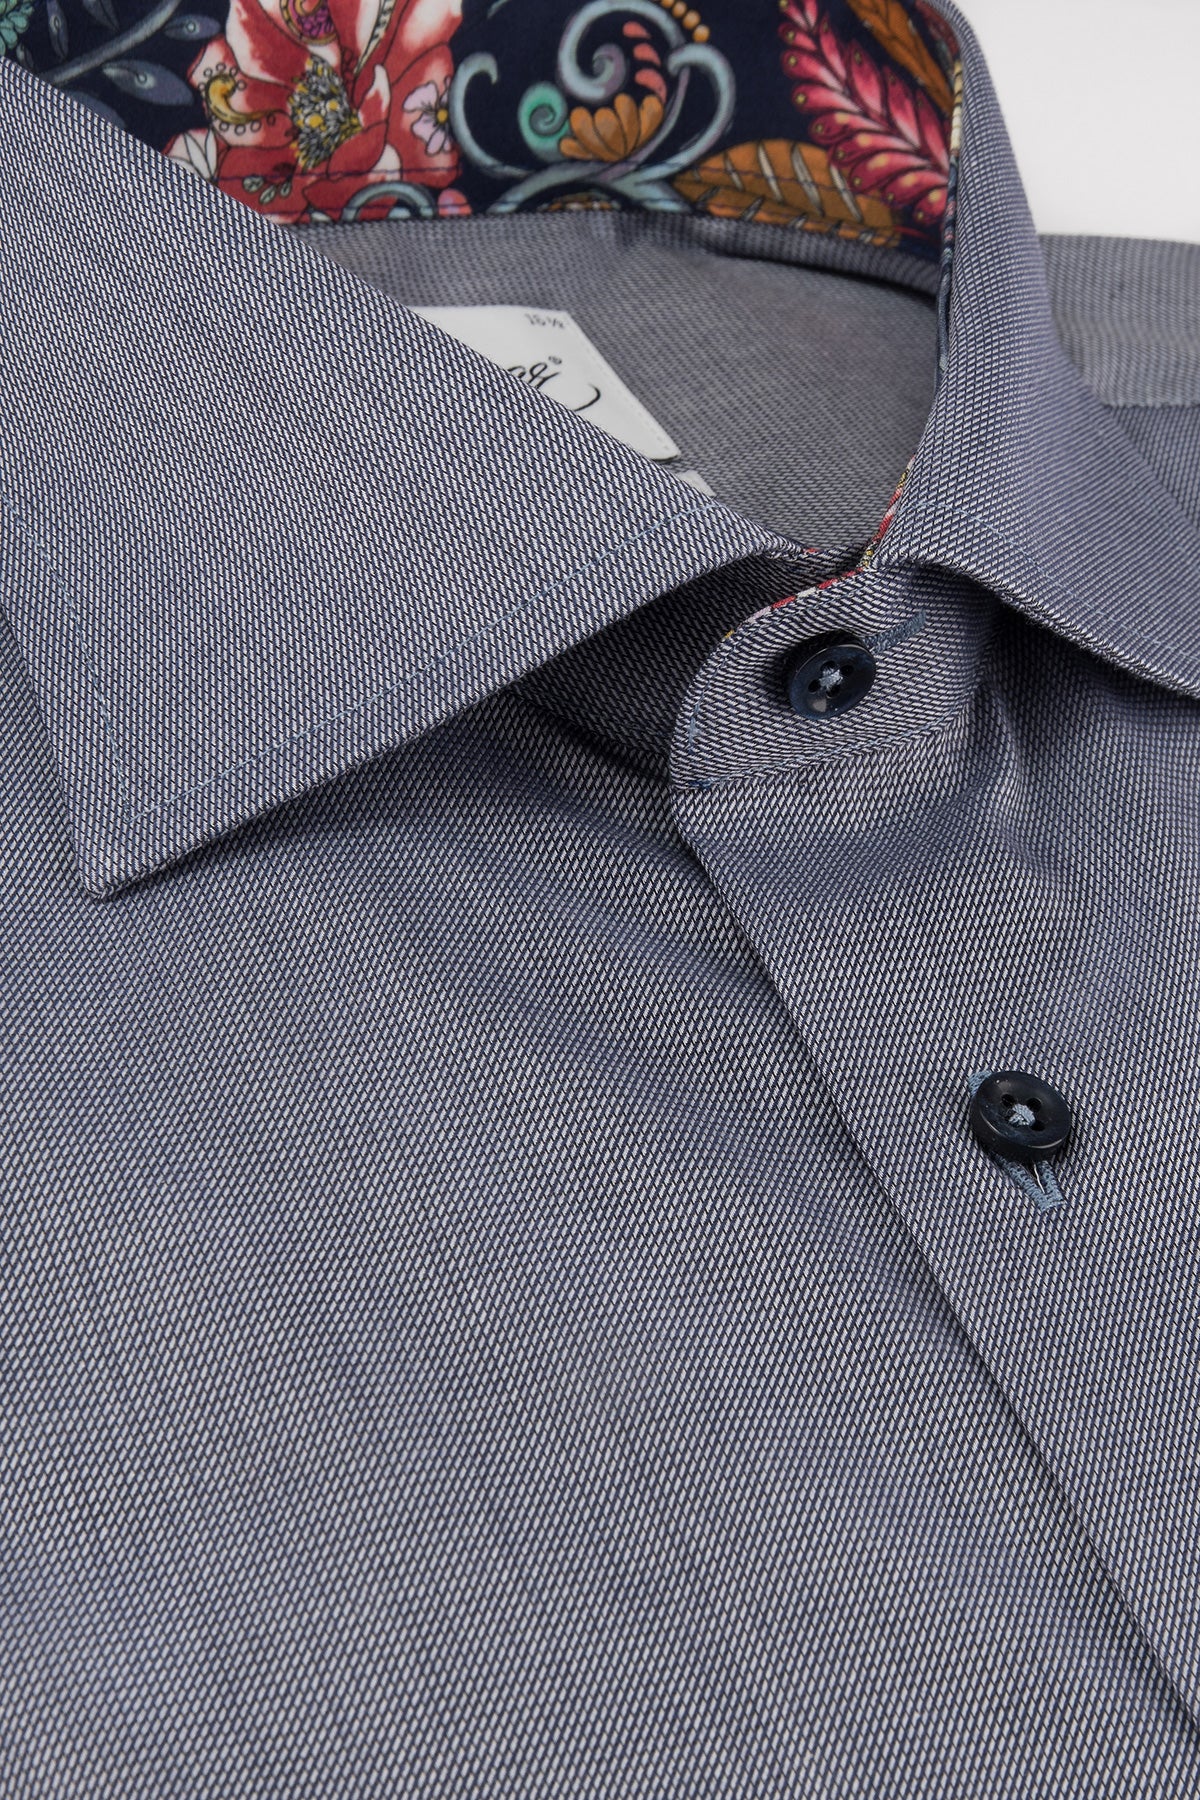 Navy regular fit shirt with contrast details